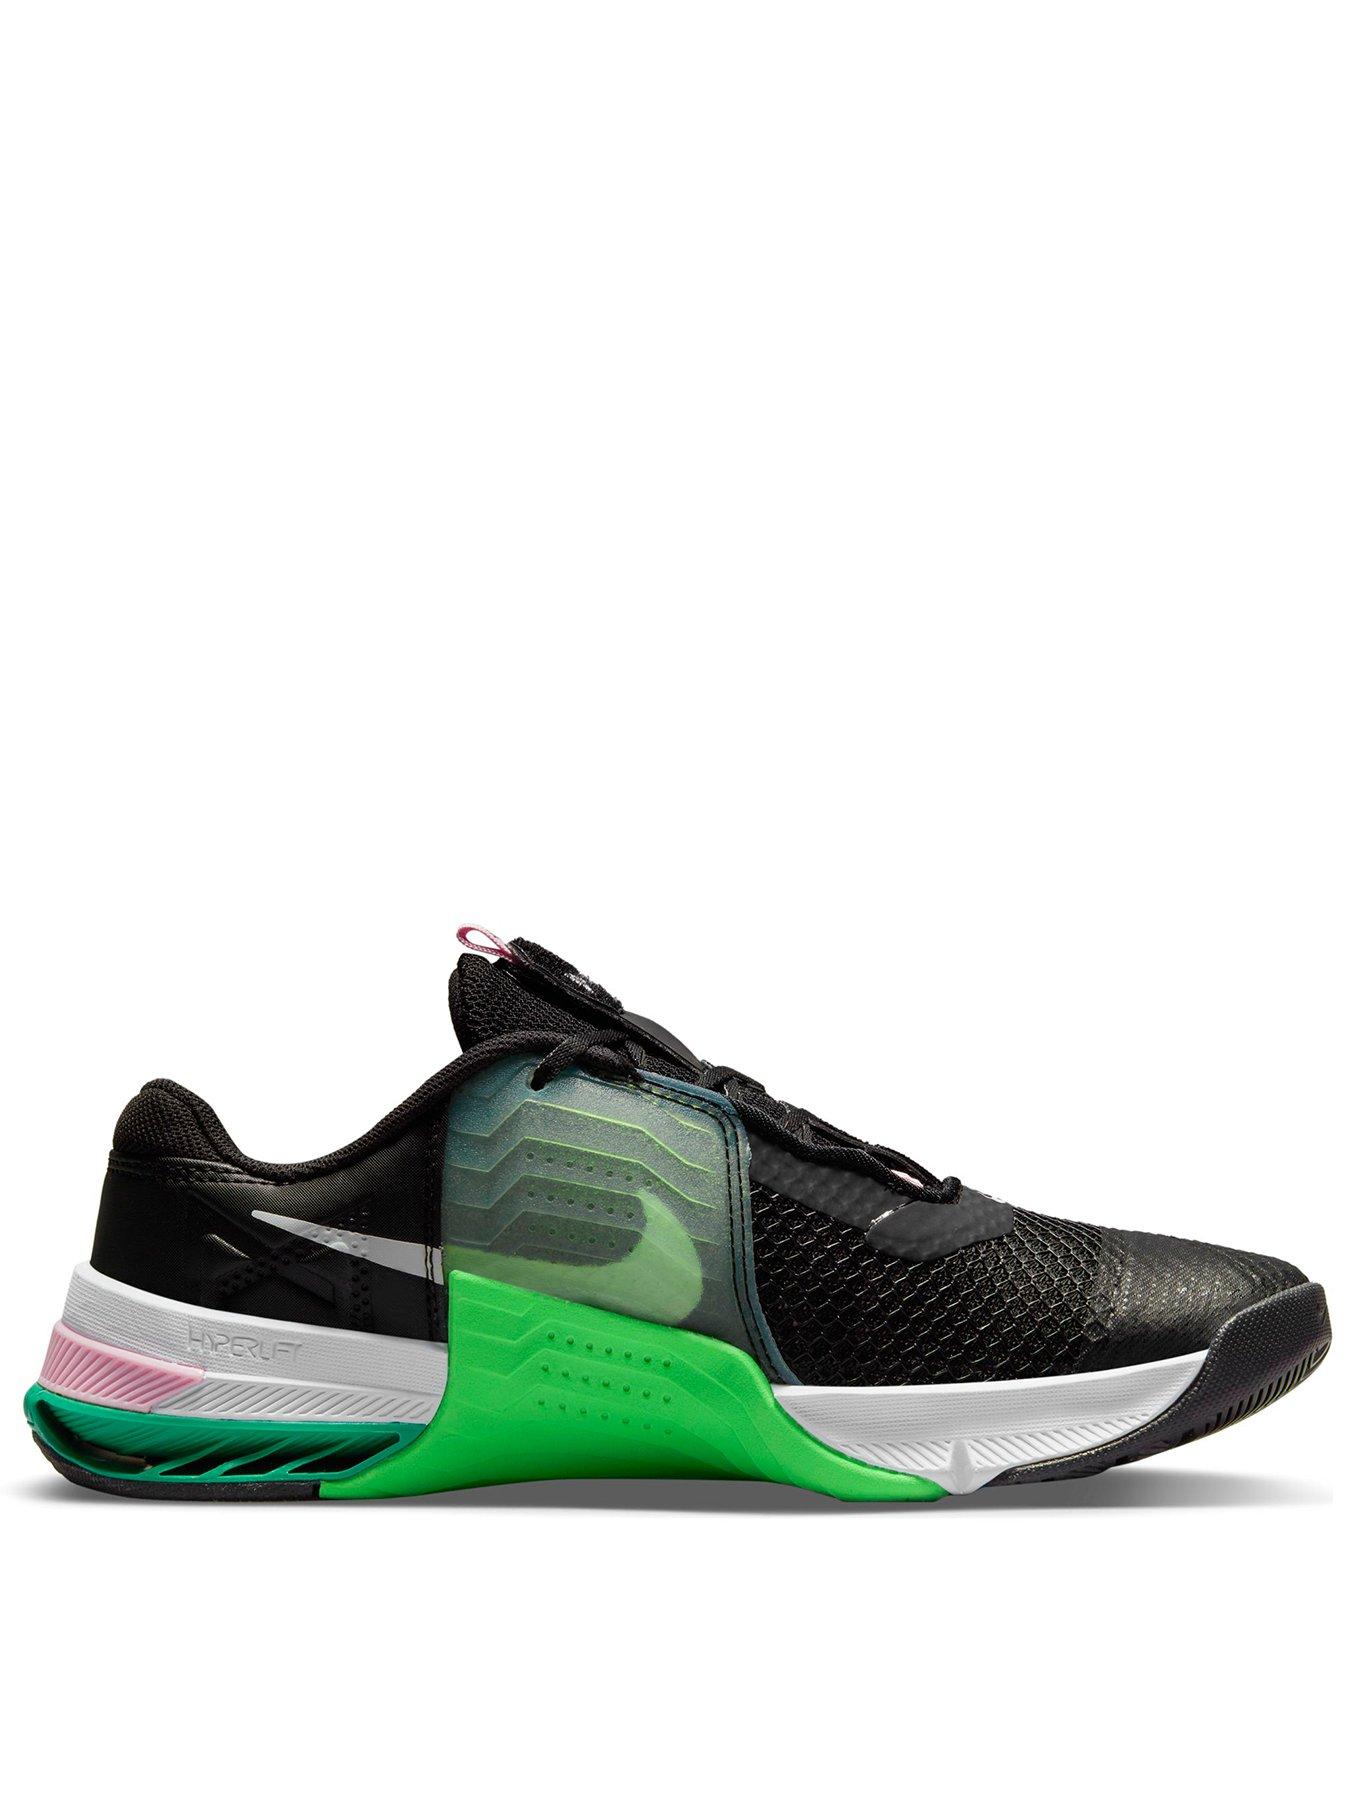 Trainers Metcon - Black/Green/Pink